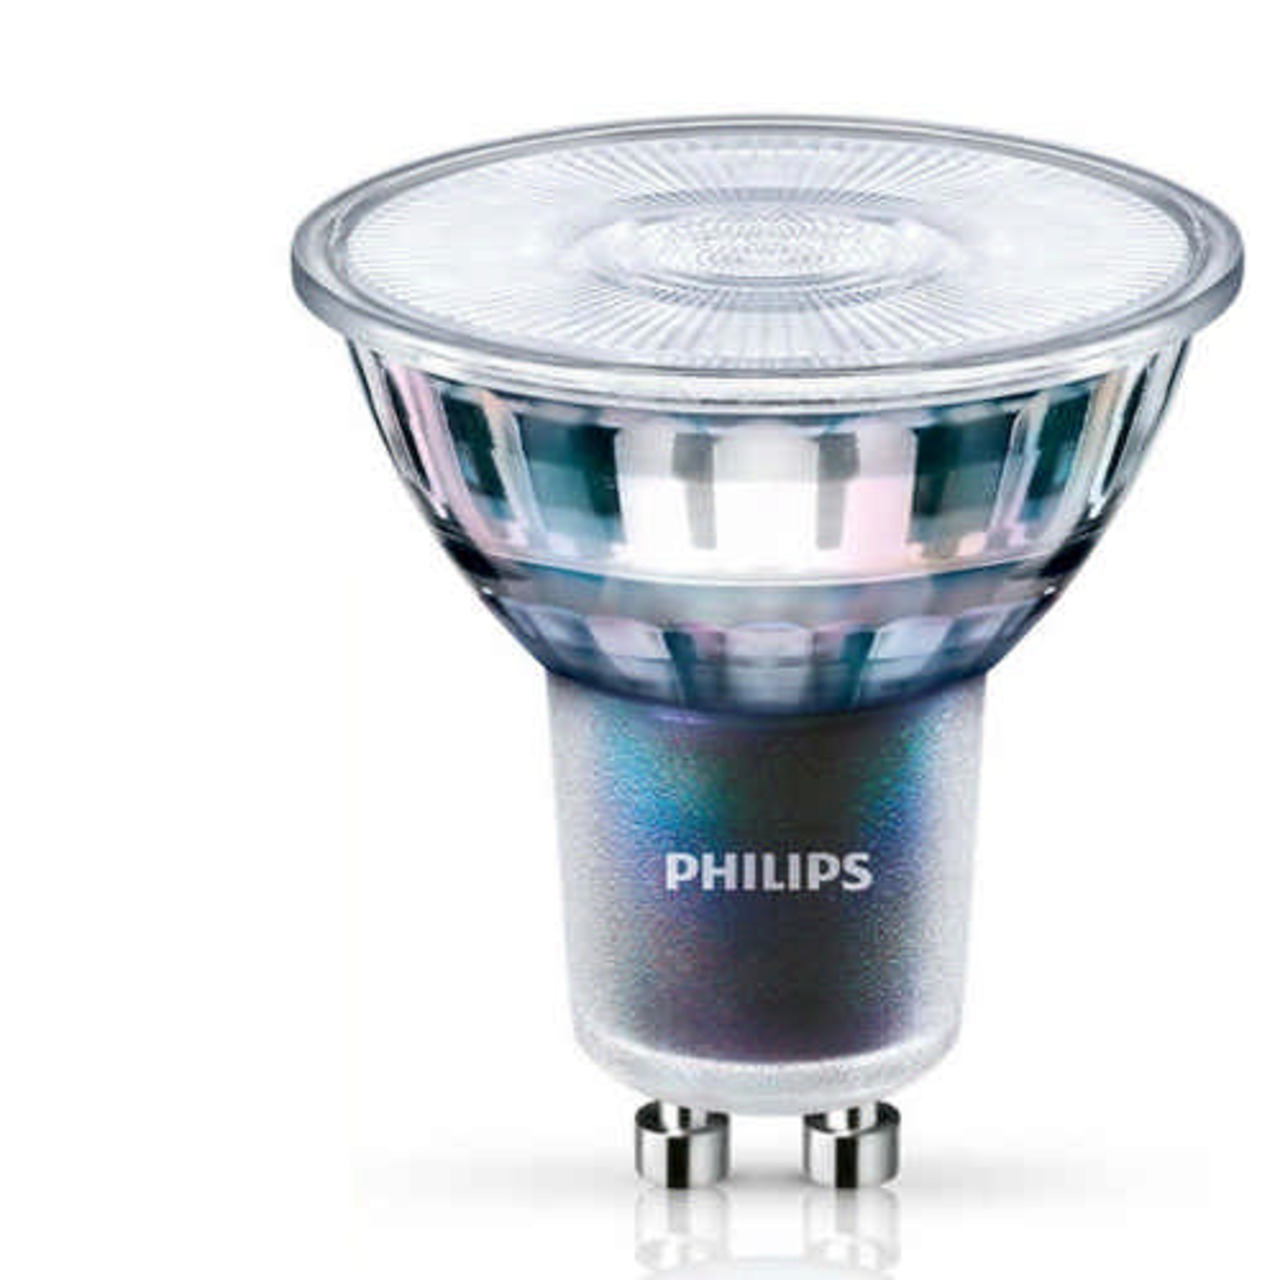 Philips MASTER ExpertColor 5-5-W-GU10-LED-Lampe- 355 lm- 97 Ra- 25- 2700K- warmweiss- dimmbar